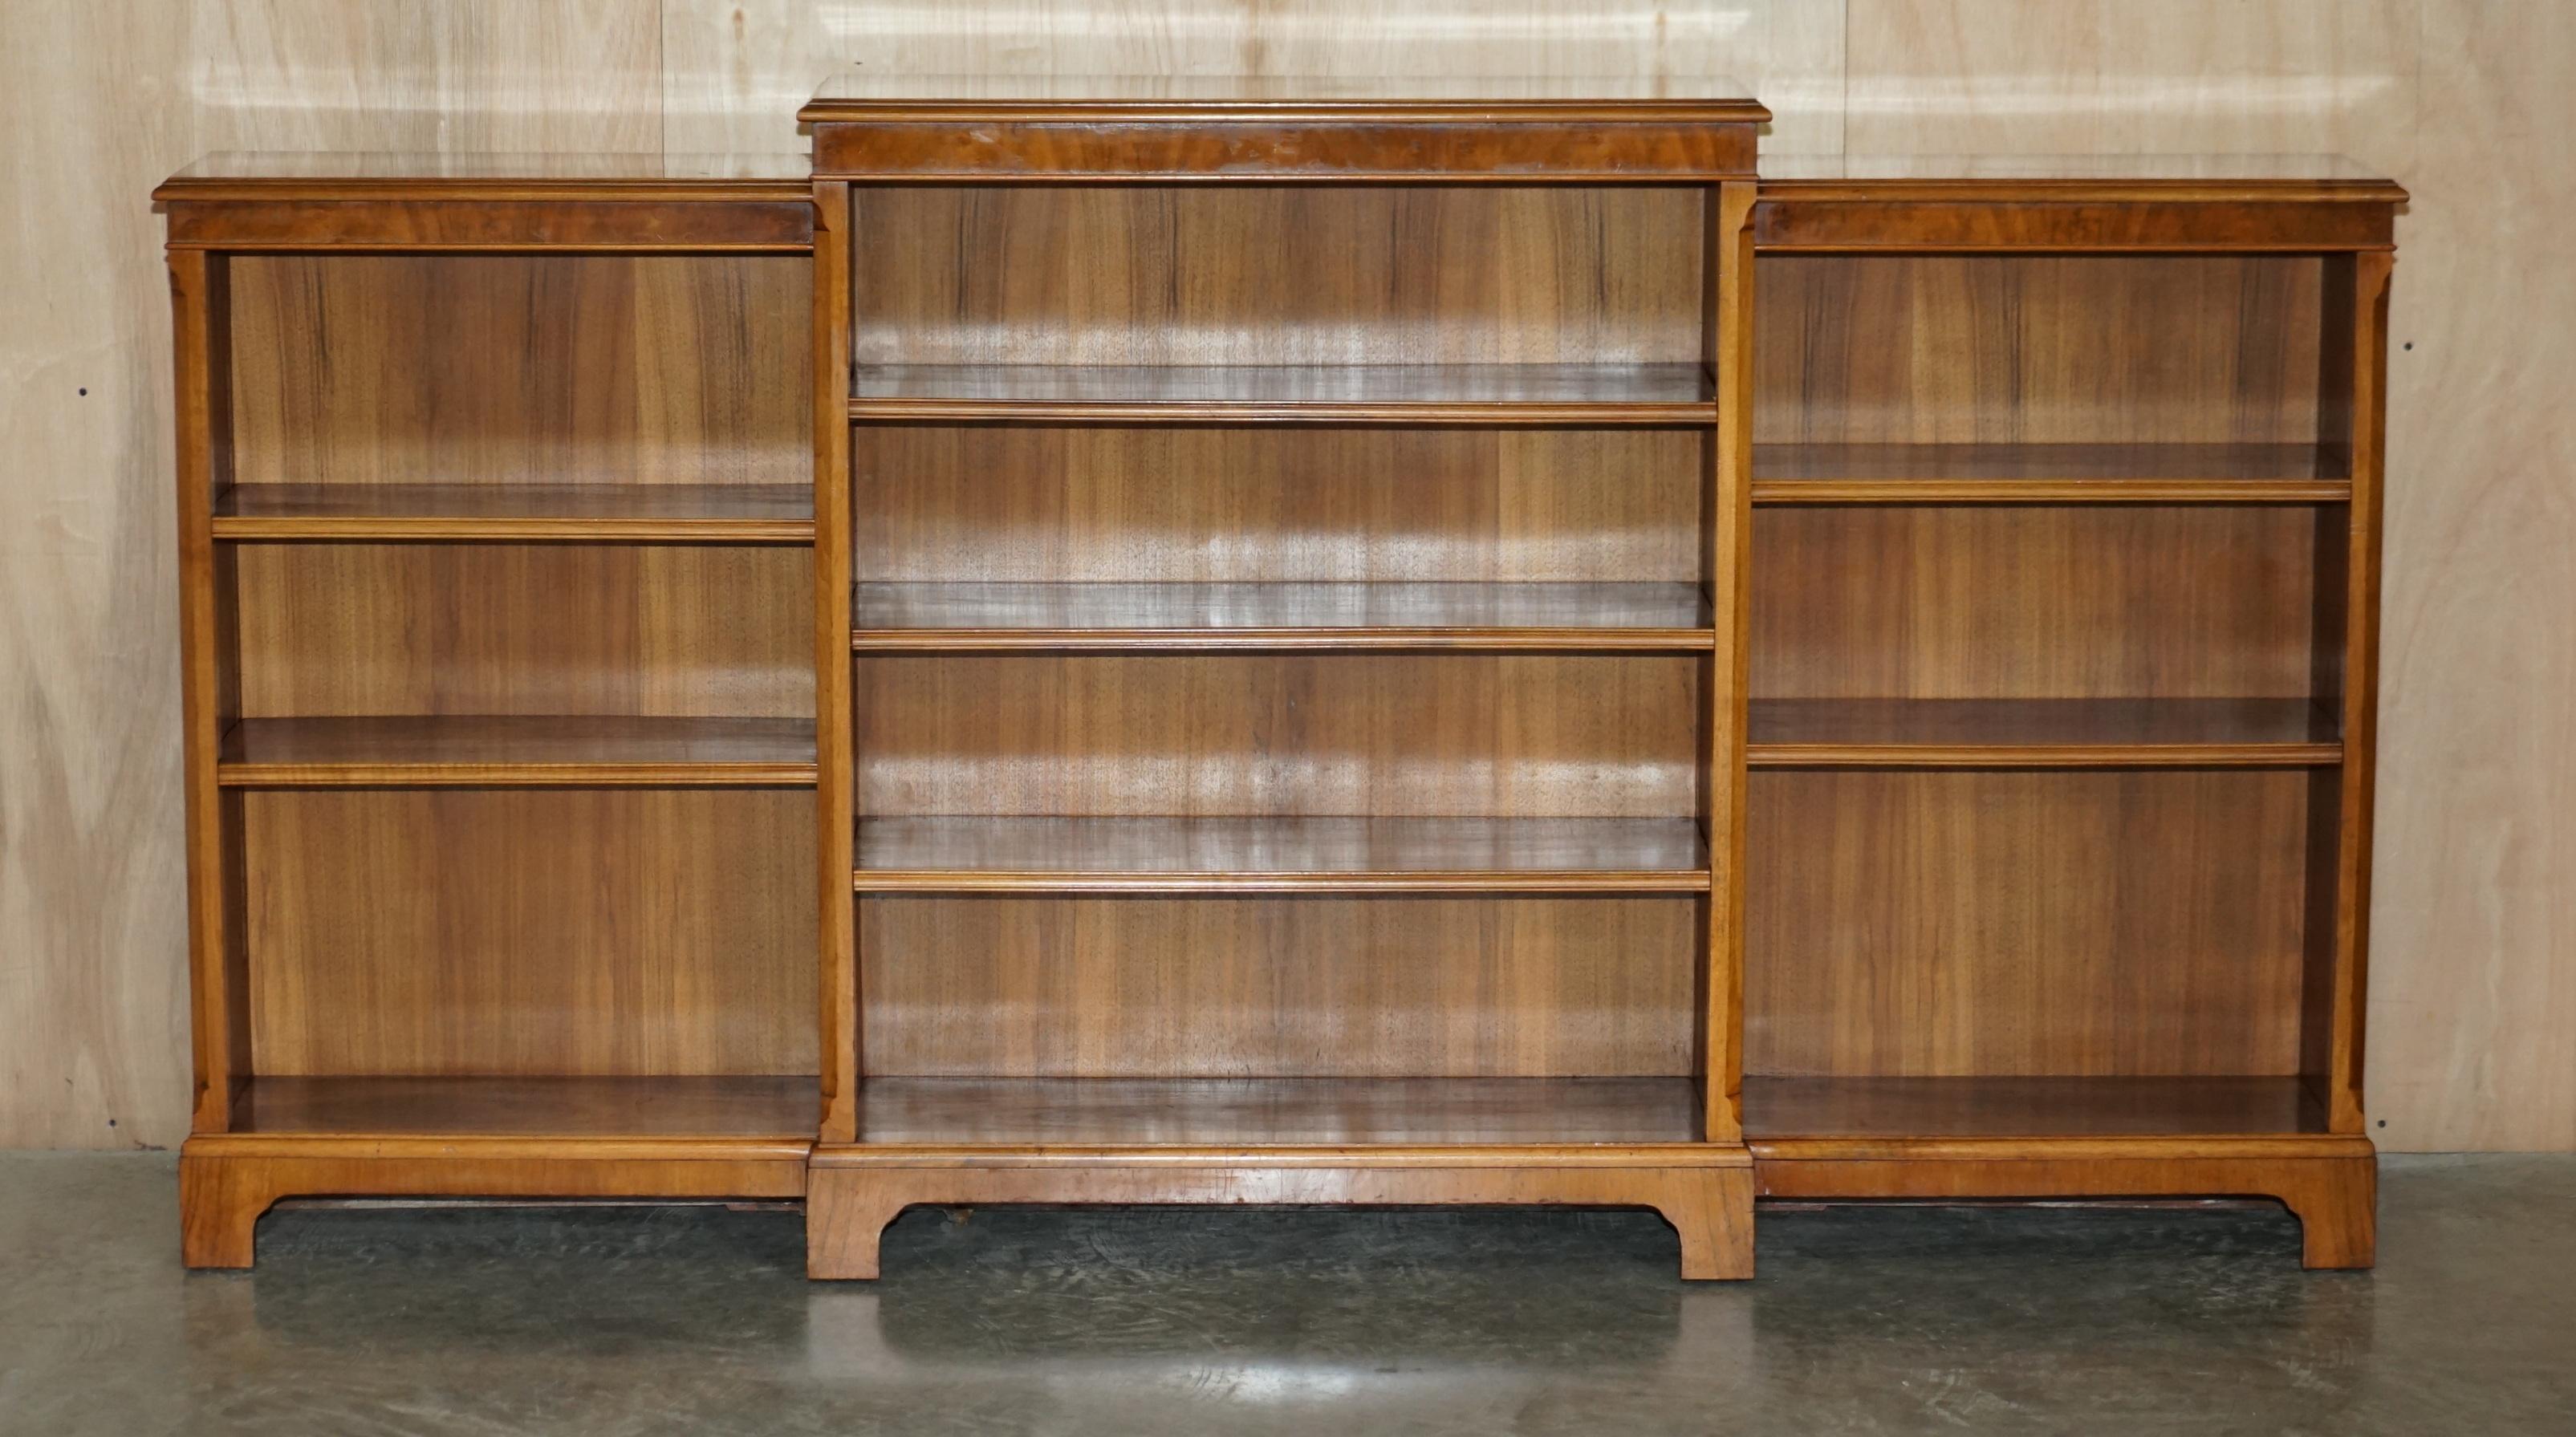 We are delighted to offer for sale this lovely antique Burr Walnut dwarf open library bookcase with breakfront.

A very good looking decorative and well made bookcase, the front top panels are in burr walnut, the rest is light walnut, the shelves